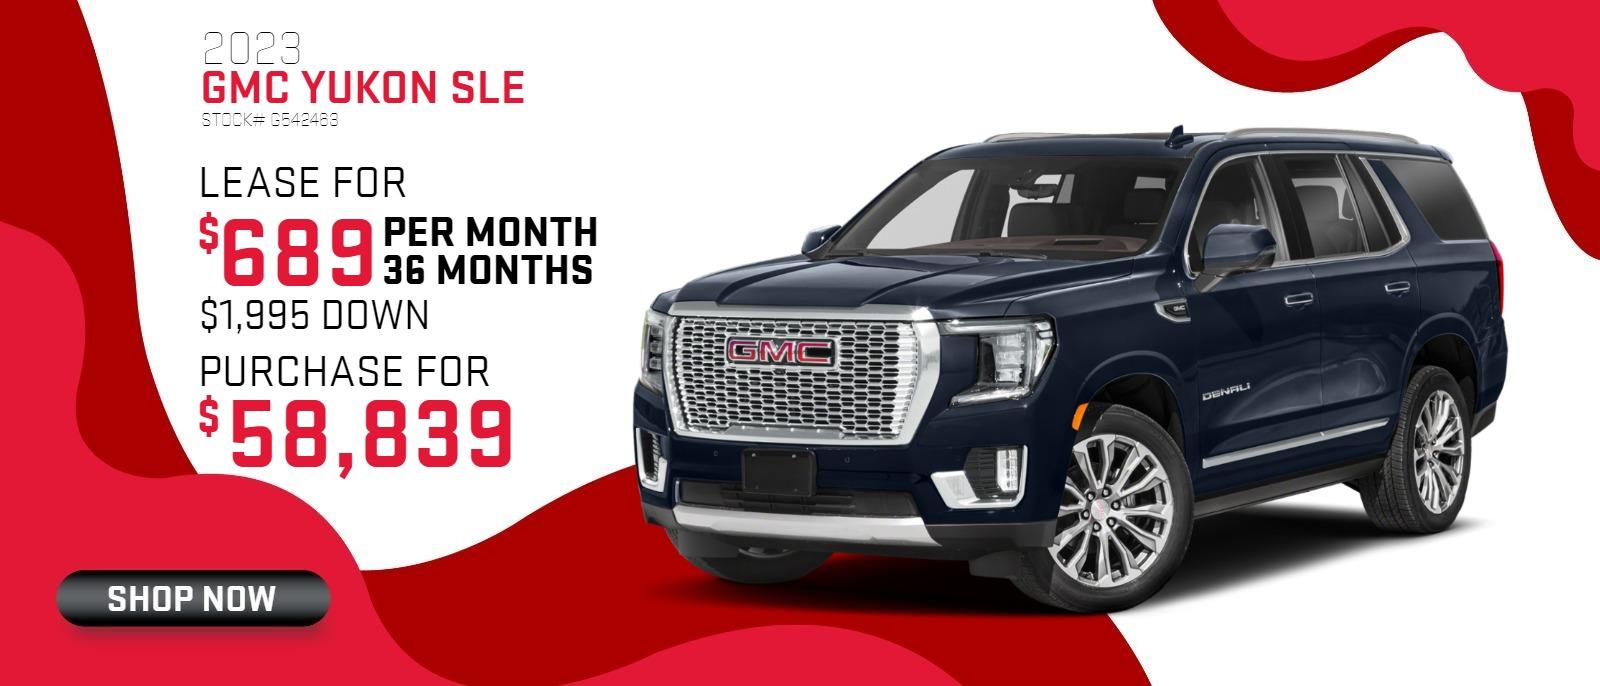 2024 Yukon SLE
Stock# G542463
Lease for $689 per month, 36 months, $1995 down
Purchase for $58,839